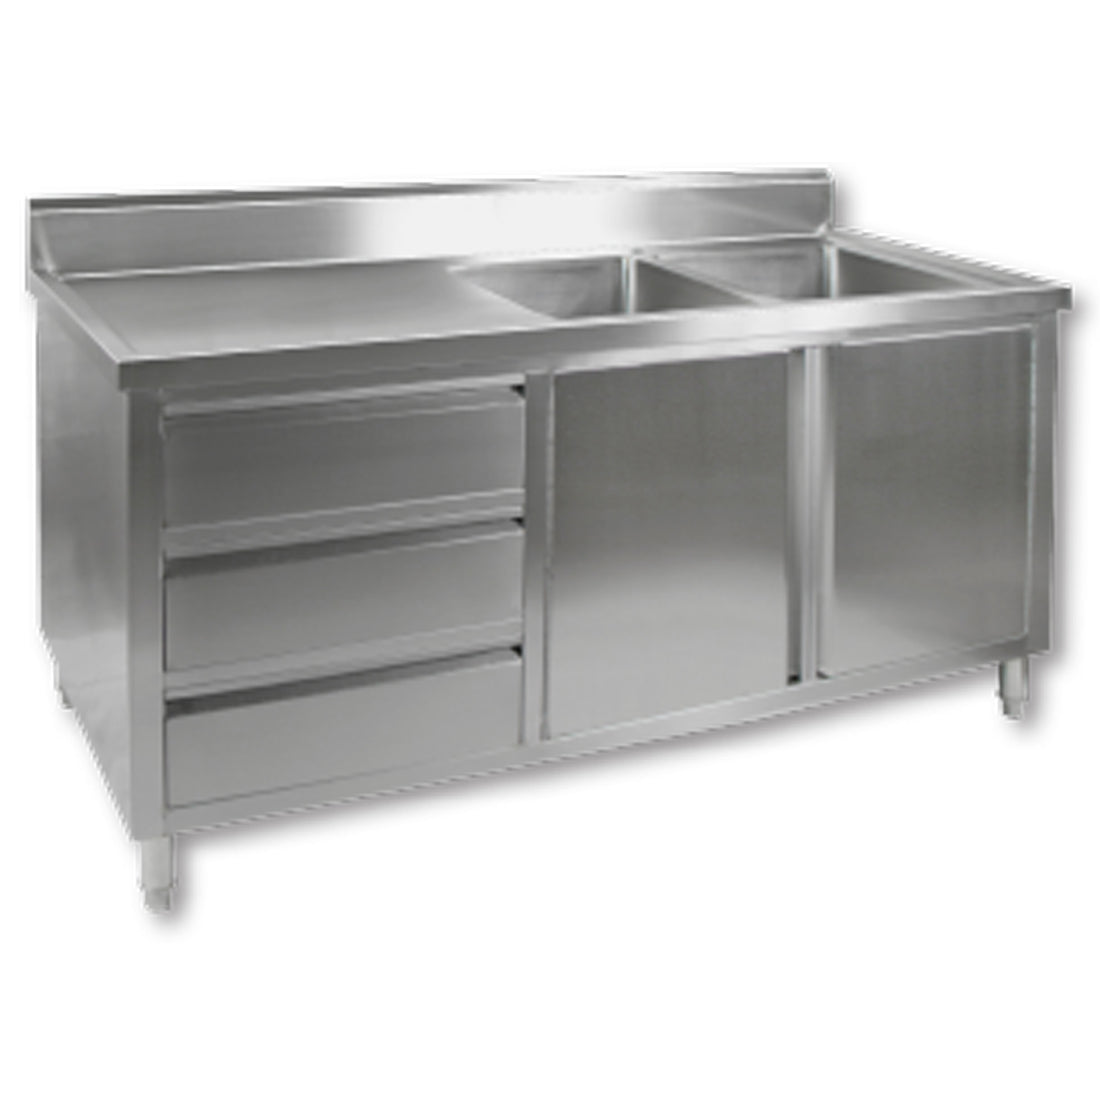 DSC-1800R-H KITCHEN TIDY CABINET WITH DOUBLE RIGHT SINKS